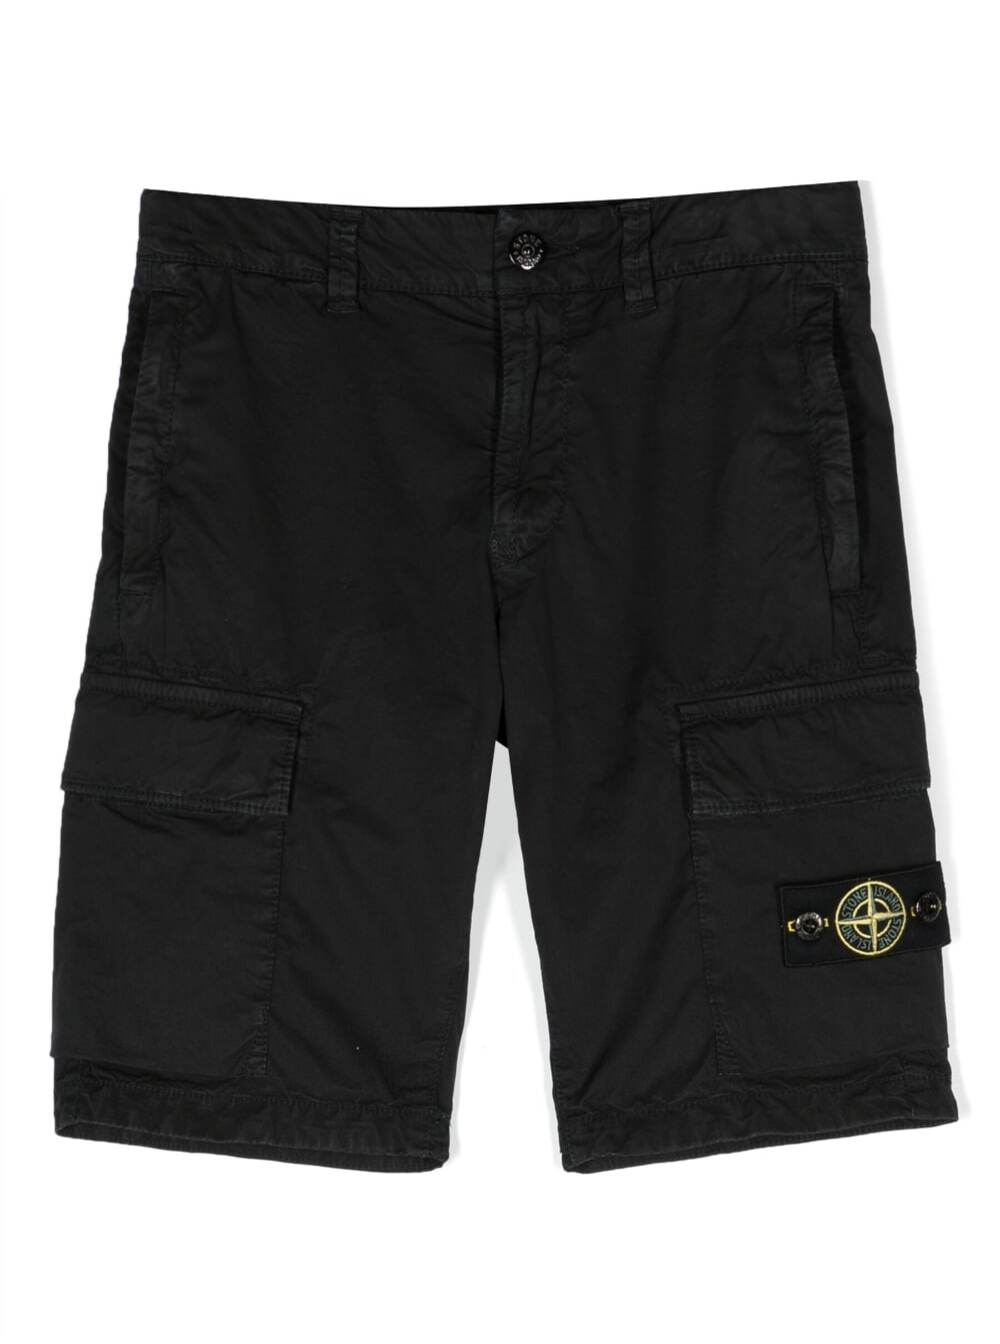 STONE ISLAND JUNIOR BLACK BERMUDA SHORTS WITH PATCH POCKETS AND LOGO PATCH IN COTTON BLEND BOY